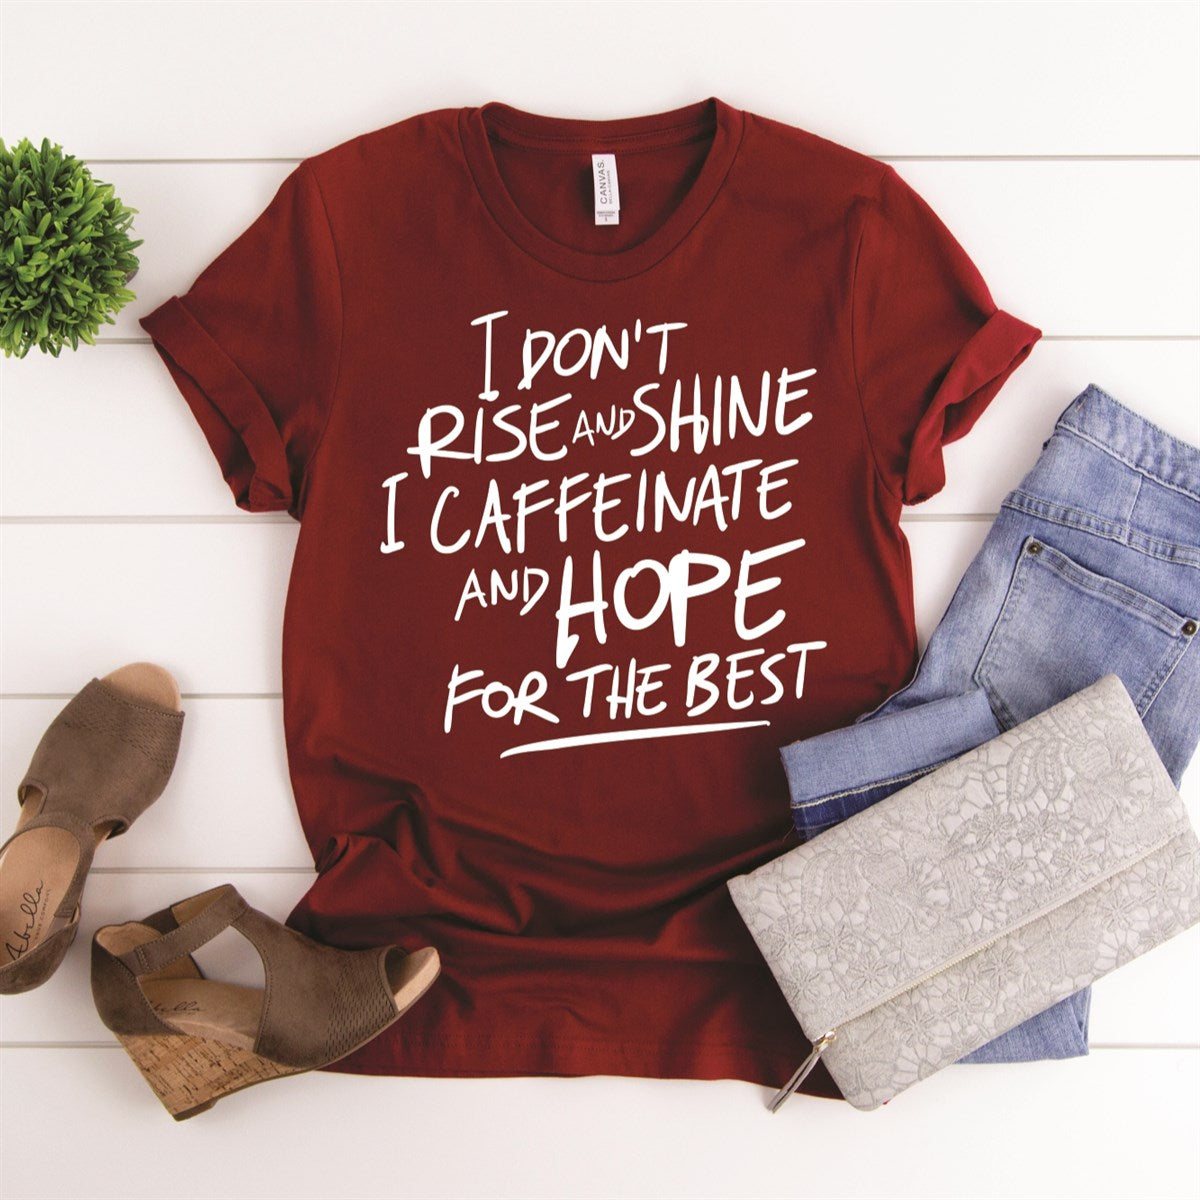 Caffeinate and Hope for the Best Women's T-Shirt